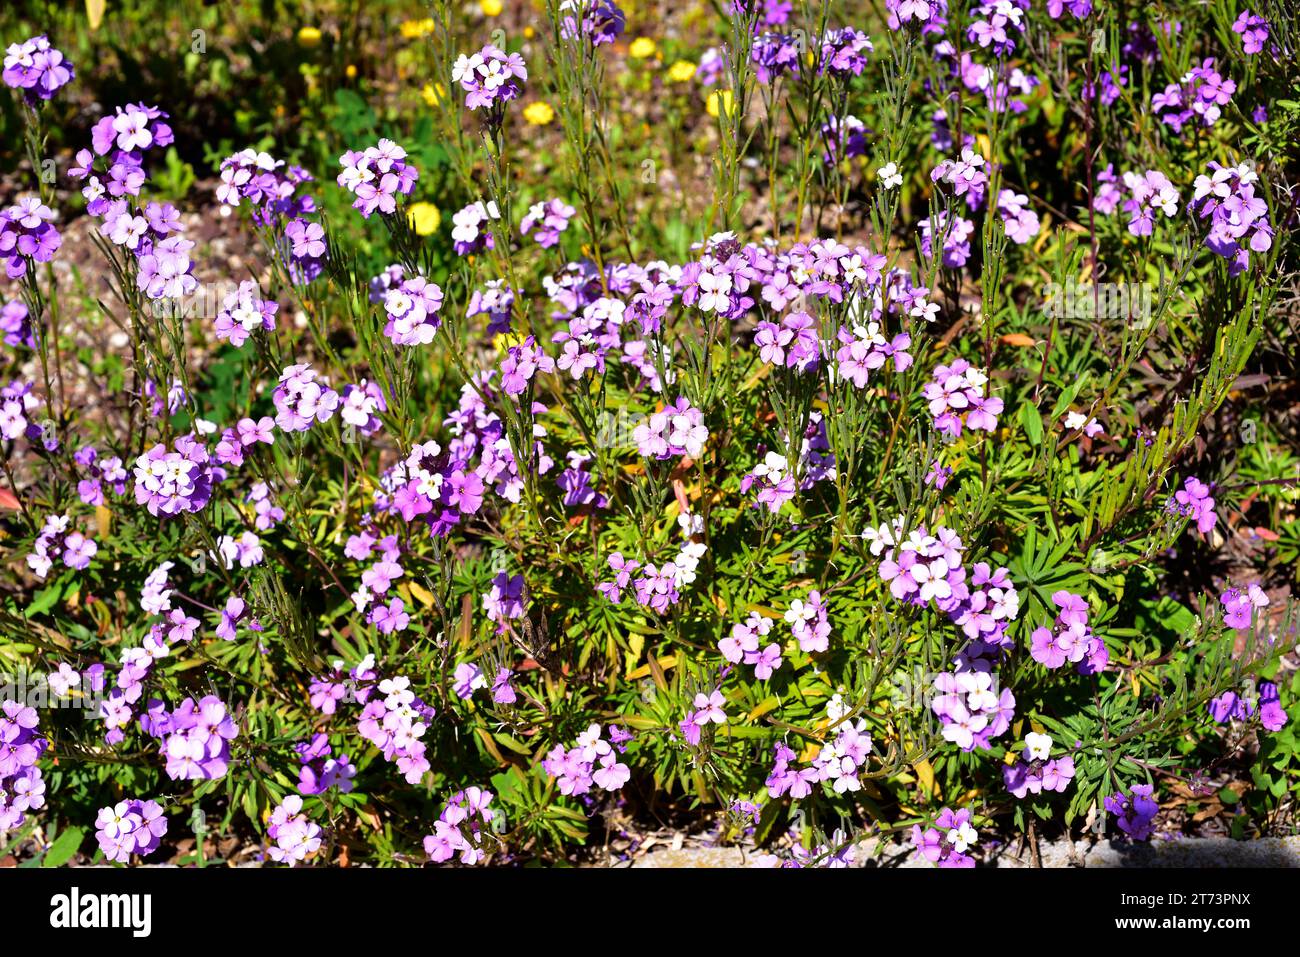 Alheli de monte (Erysimum bicolor) is a shrub endemic to Canary Islands and Madeira. Stock Photo